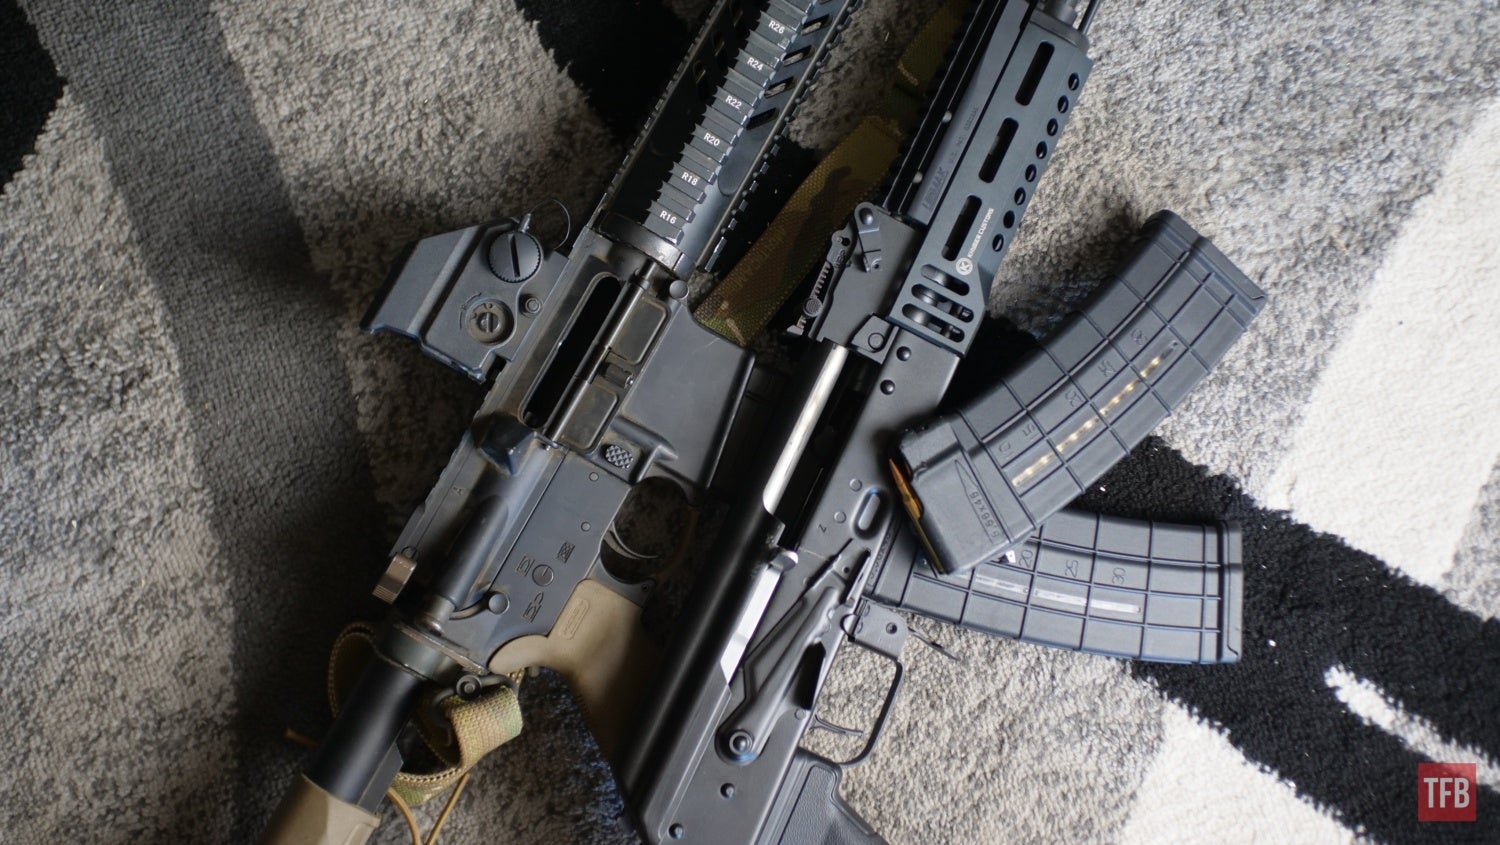 REVIEW: The Rotating Bolt Industries RB-01 5.56 AK